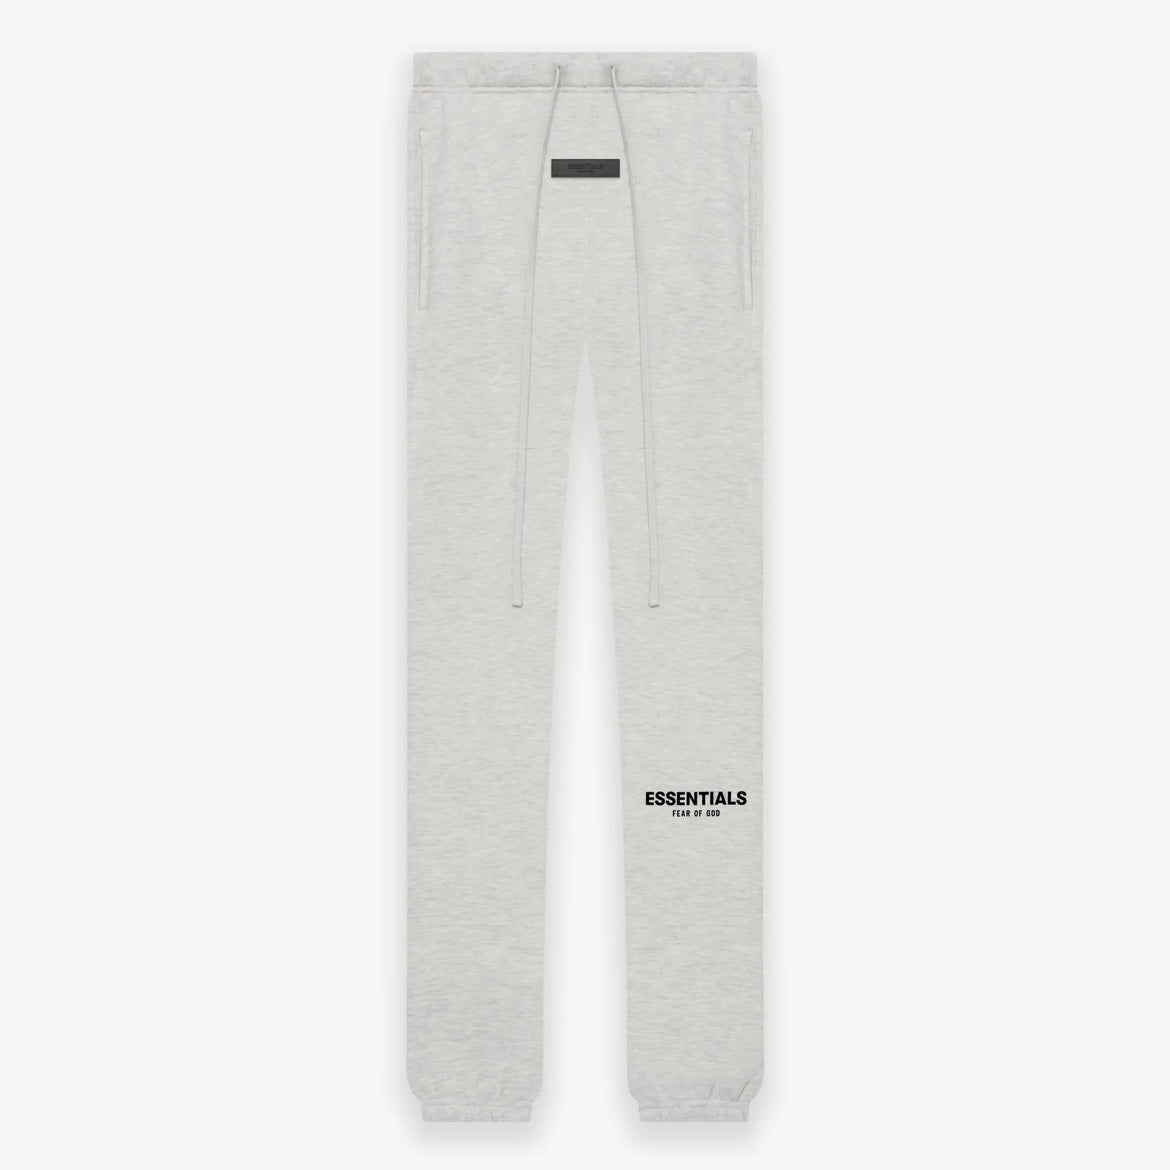 Fear of God Essentials Light Oatmeal Sweatpants Front View